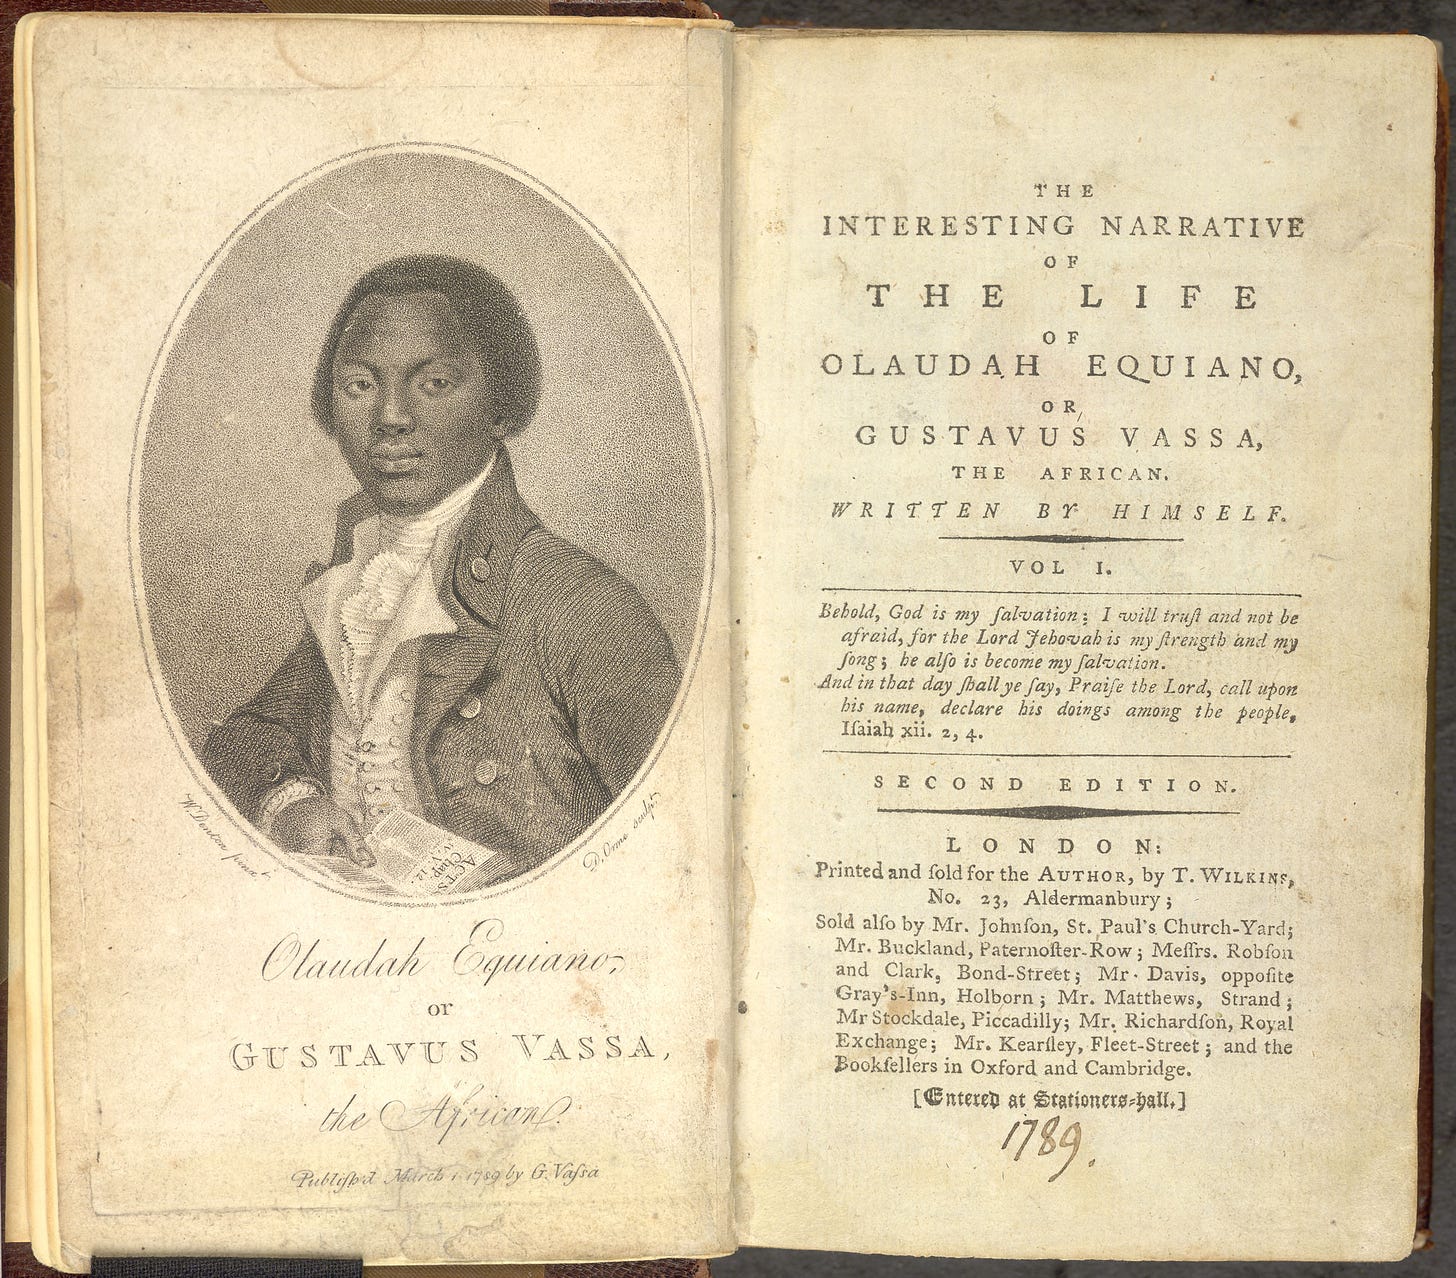 Frontispiece of The Interesting Narrative of The Life of Olaudah Equiano or Gustavus Vassa The African published in 1789 in London